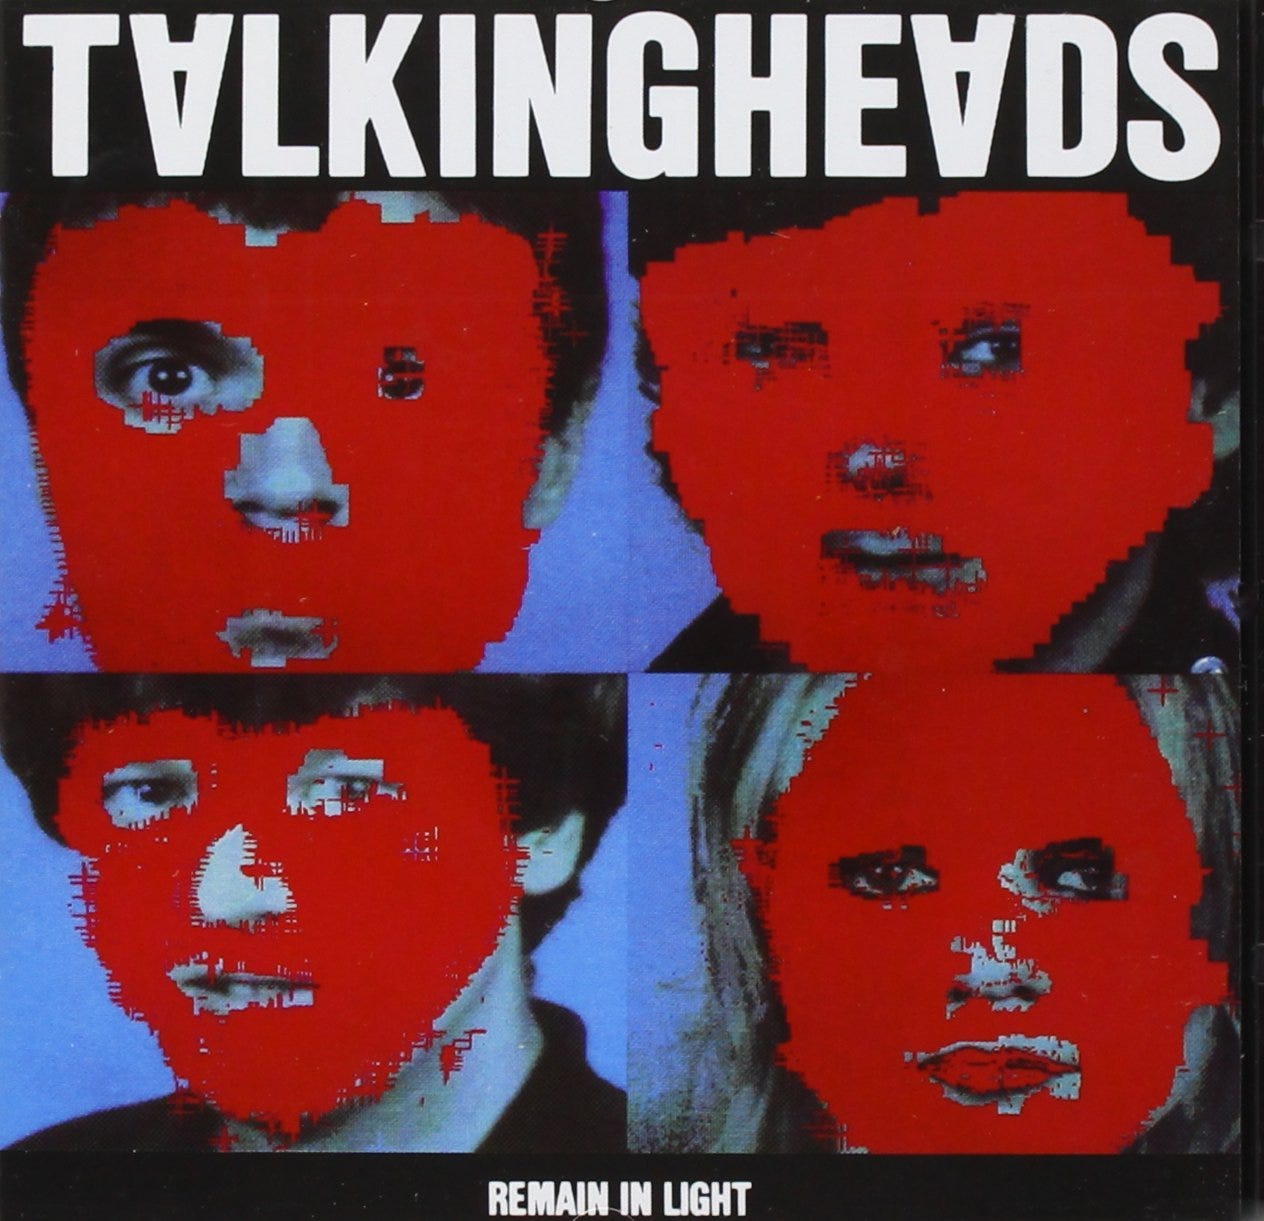 Talking Heads : Remain in Light - A Work of Ecstatic Maximalism | Treble